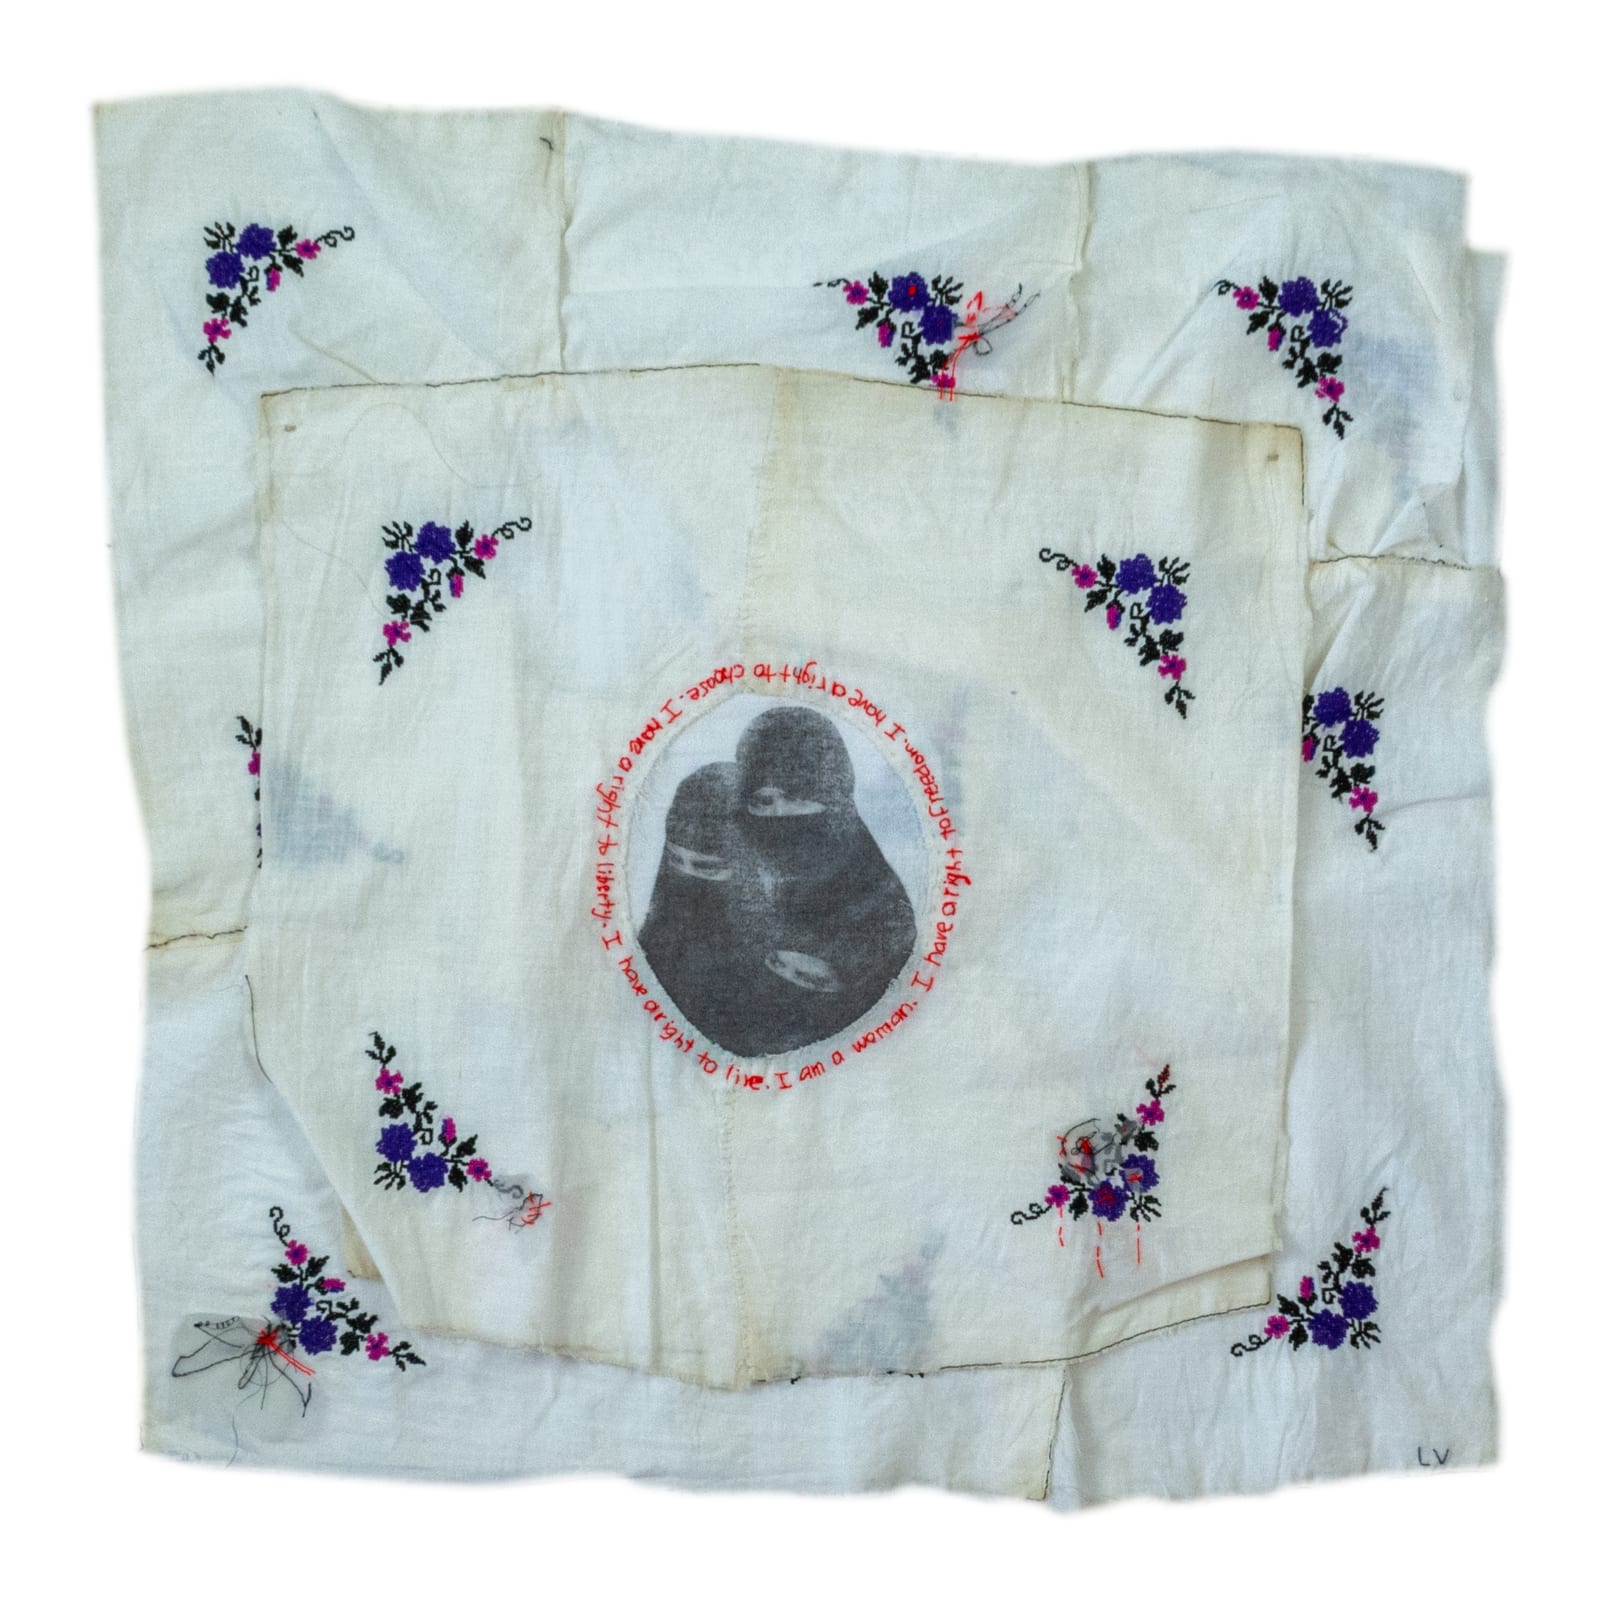 Laura Villarreal I Have A Right, 2021 Image transfer embroidery and thread on fabric